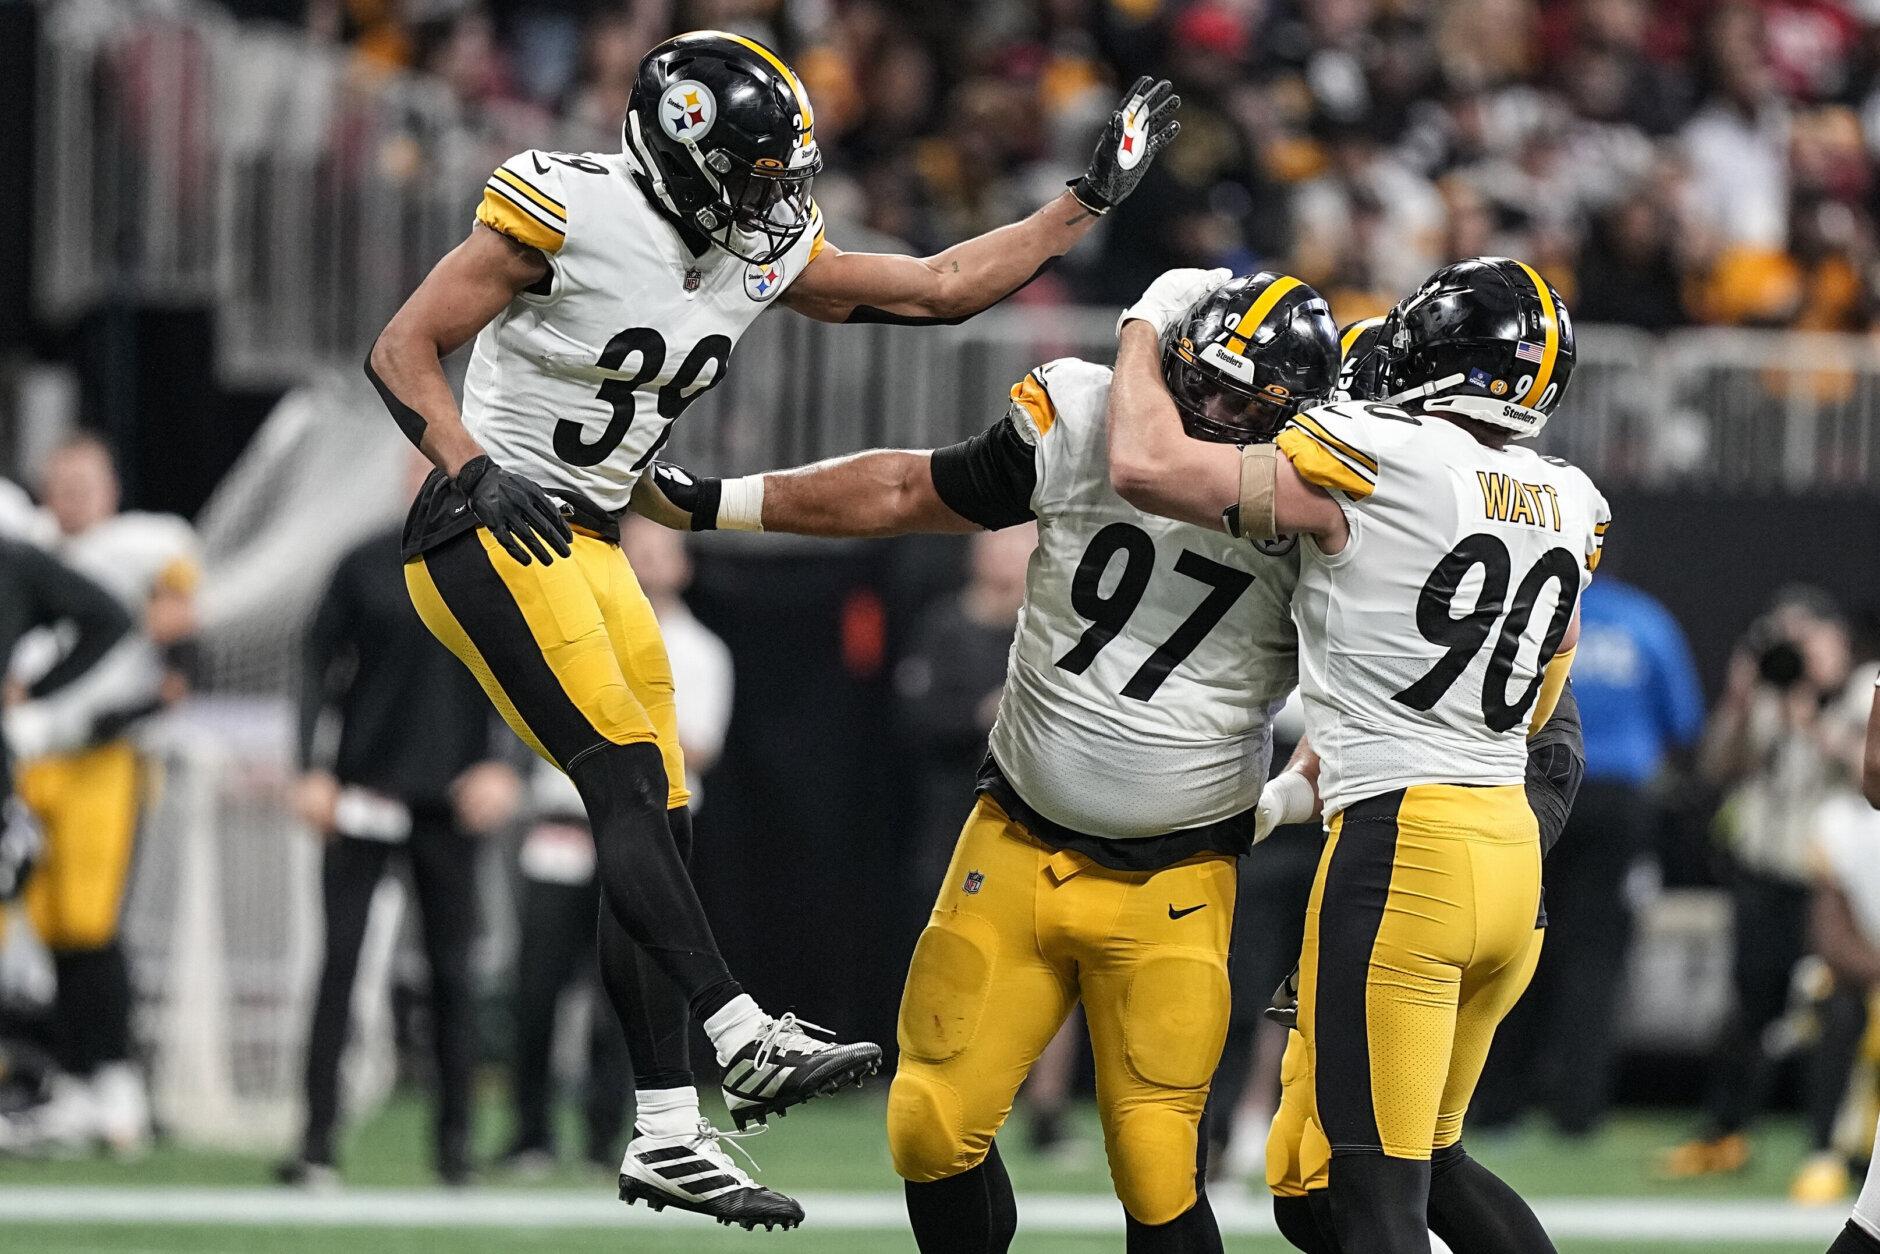 <p><em><strong>Steelers 19</strong></em><br />
<em><strong>Falcons 16</strong></em></p>
<p>For those of you who continue to stan QB wins as a legit stat: Keep that same energy for Pittsburgh being 4-1 with T.J. Watt in the lineup.</p>
